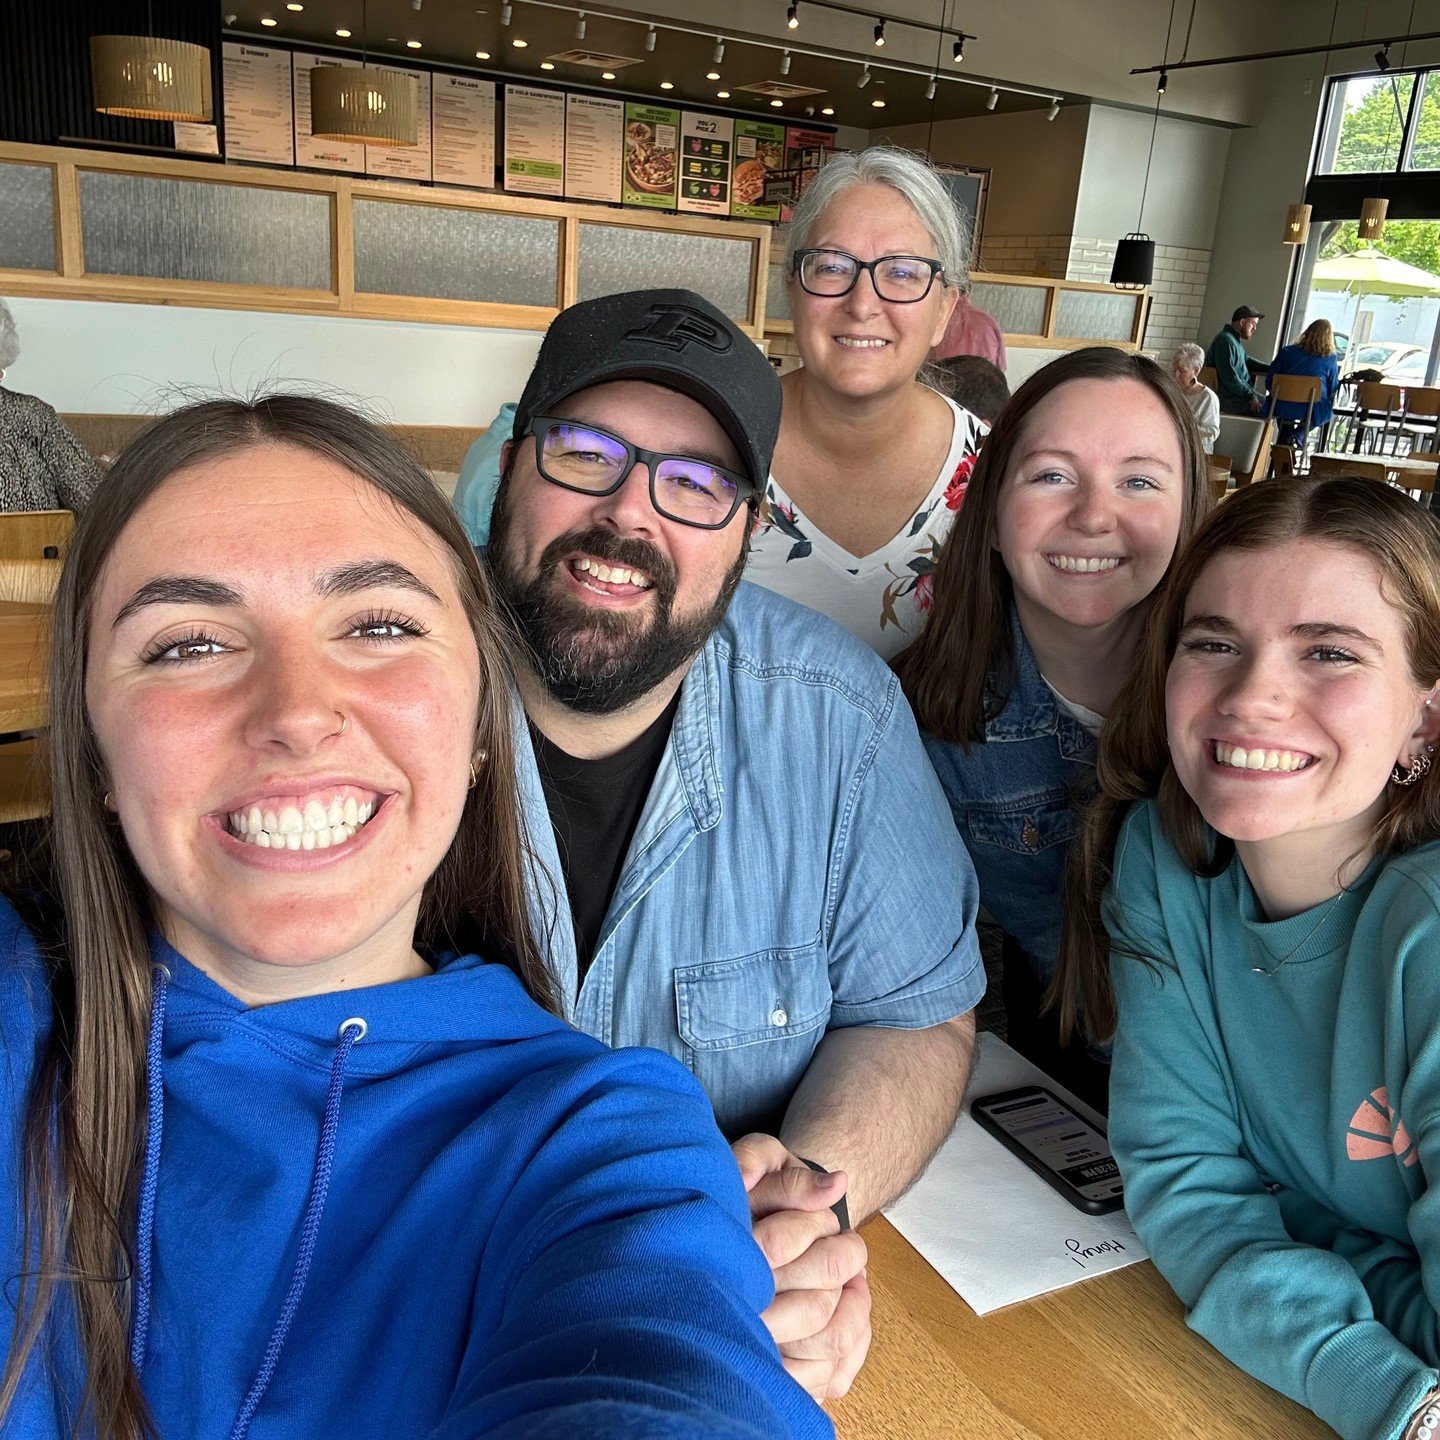 Our Family Ministry team grabbed lunch today to celebrate our fabulous intern, Abigail, as she starts a new adventure later this week. We're sad to see her go, but SO excited to see how the Lord will use her in this next chapter of life and ministry!